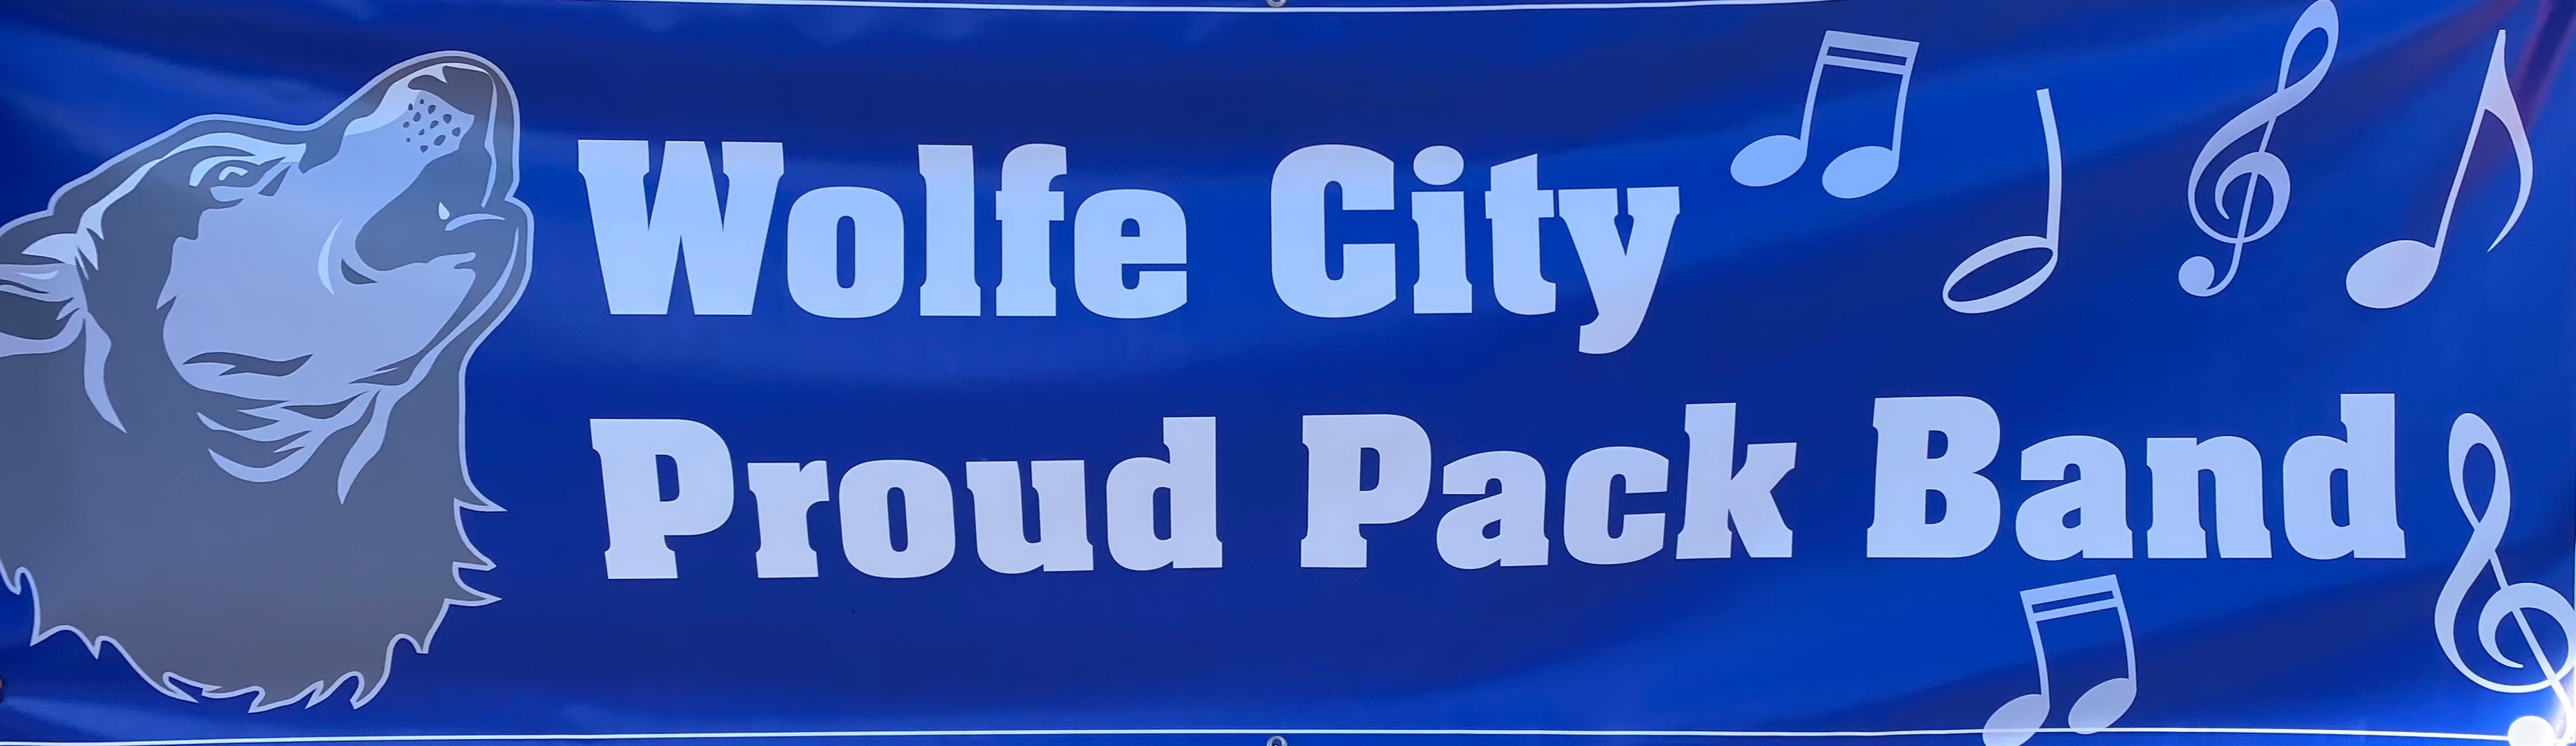 WC Proud Pack Banner